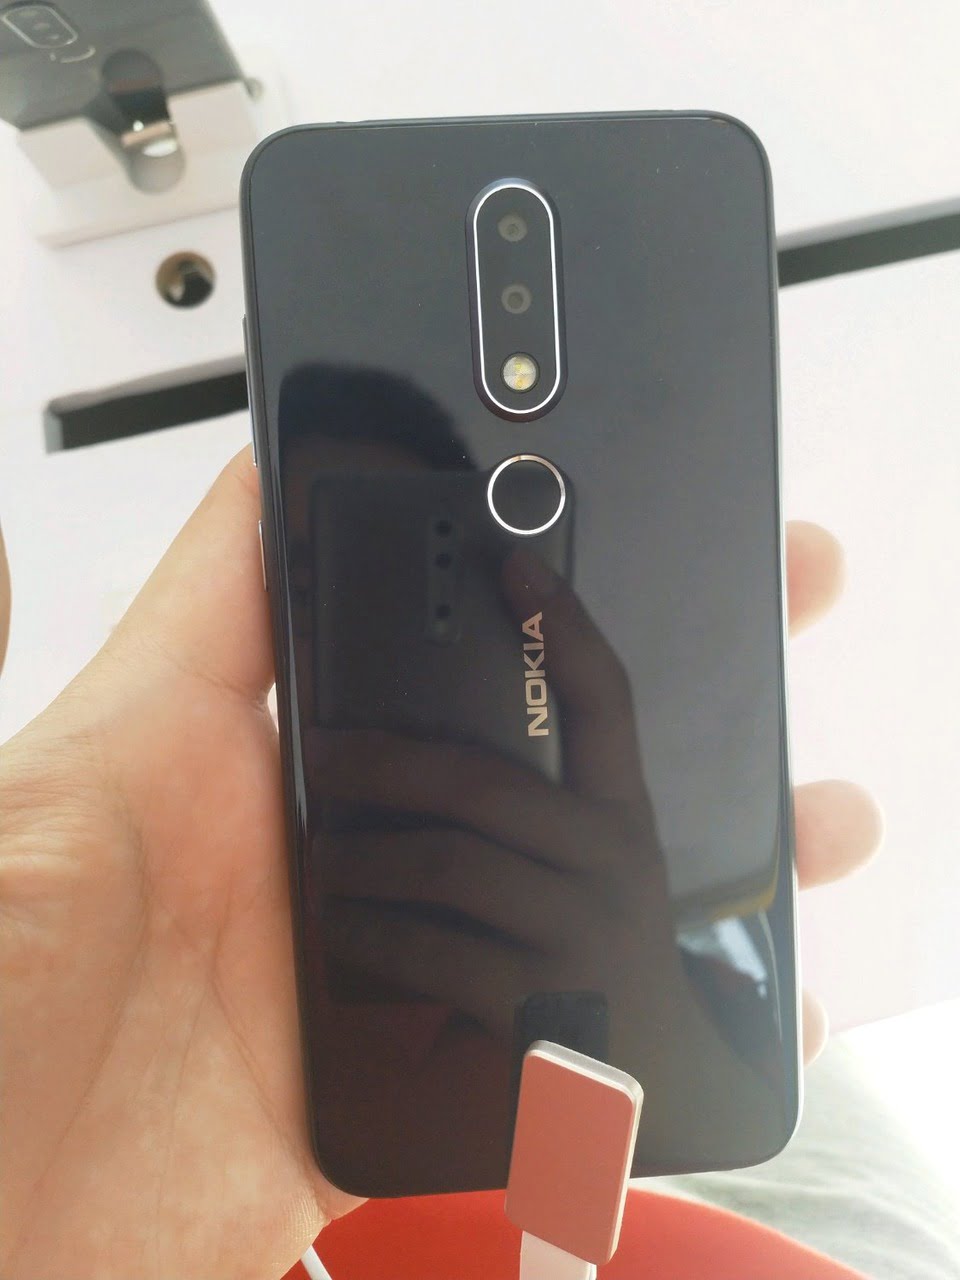 Nokia X6 From the Rear